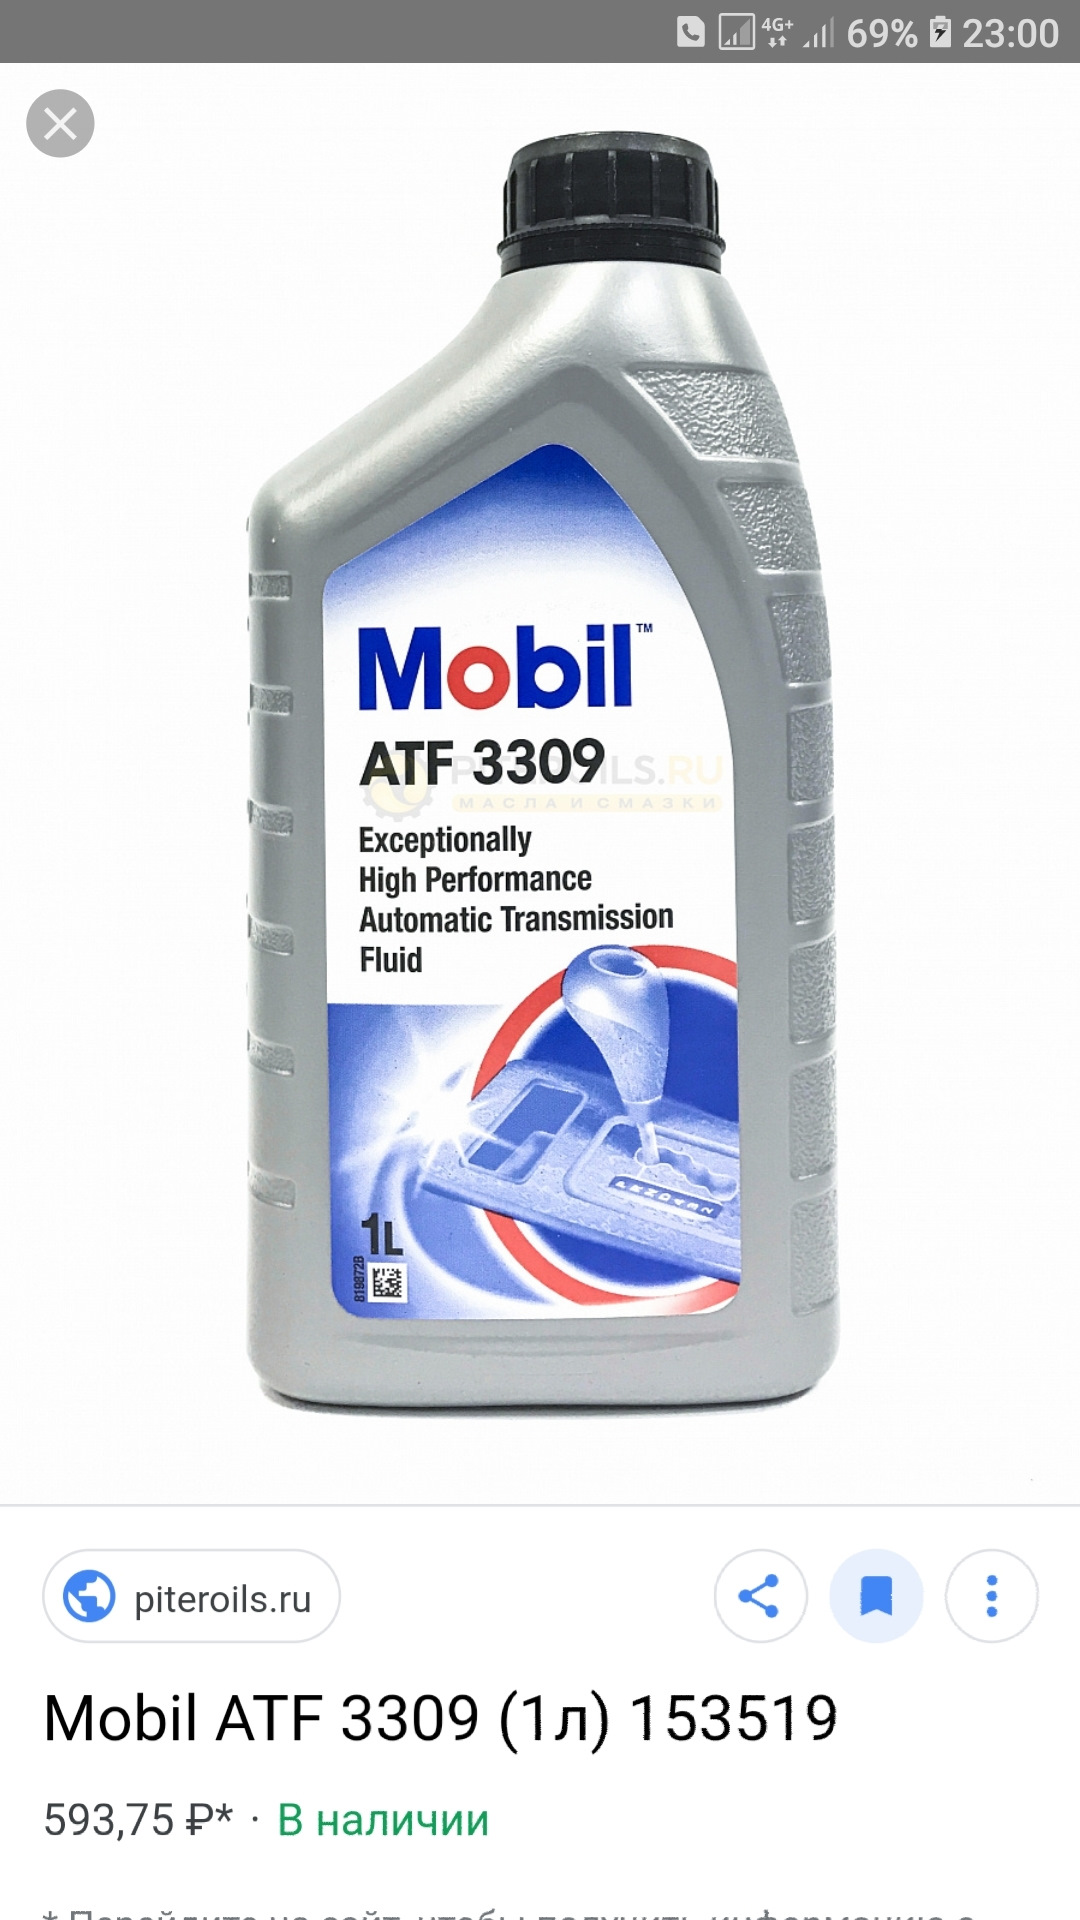 Mobil 1 atf. Масло трансмиссионное mobil 152648 ATF lt 71141 (1l). Mobil ATF 320 1л. Mobil ATF 320 1 Л (152646). Масло трансмиссионное mobil ATF 320 1 Л.